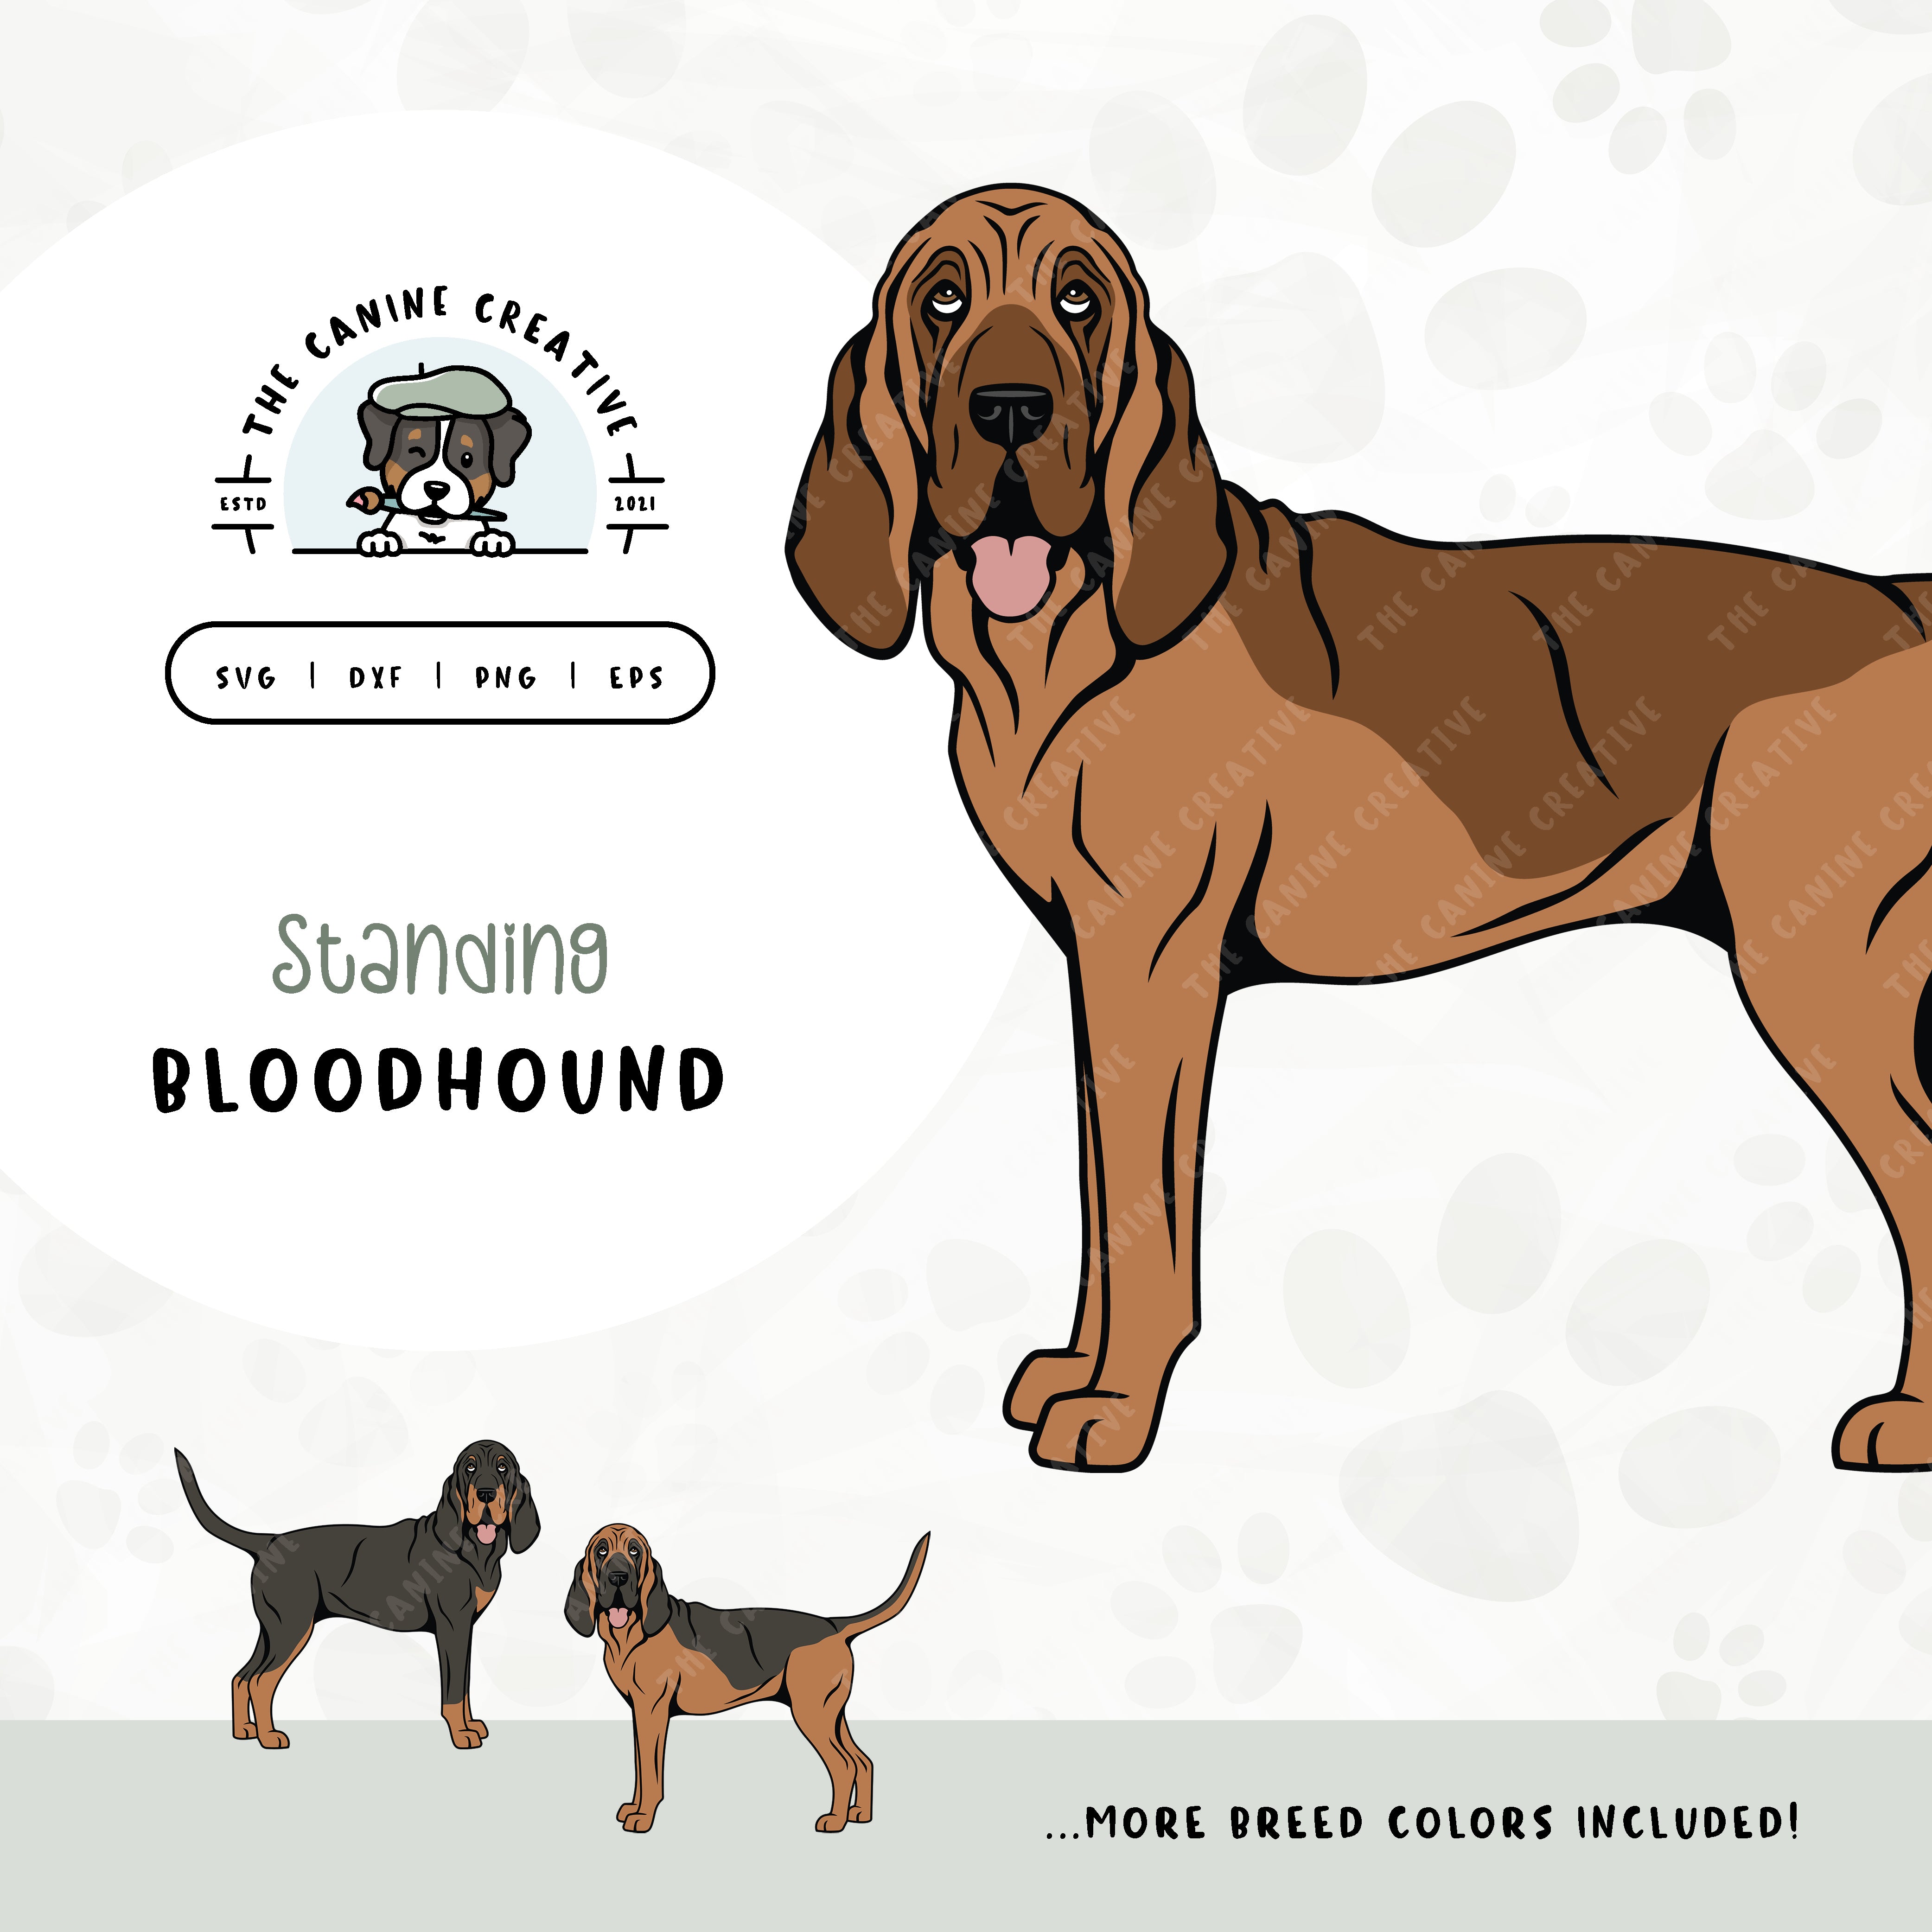 This standing dog design features a Bloodhound. File formats include: SVG, DXF, PNG, and EPS.